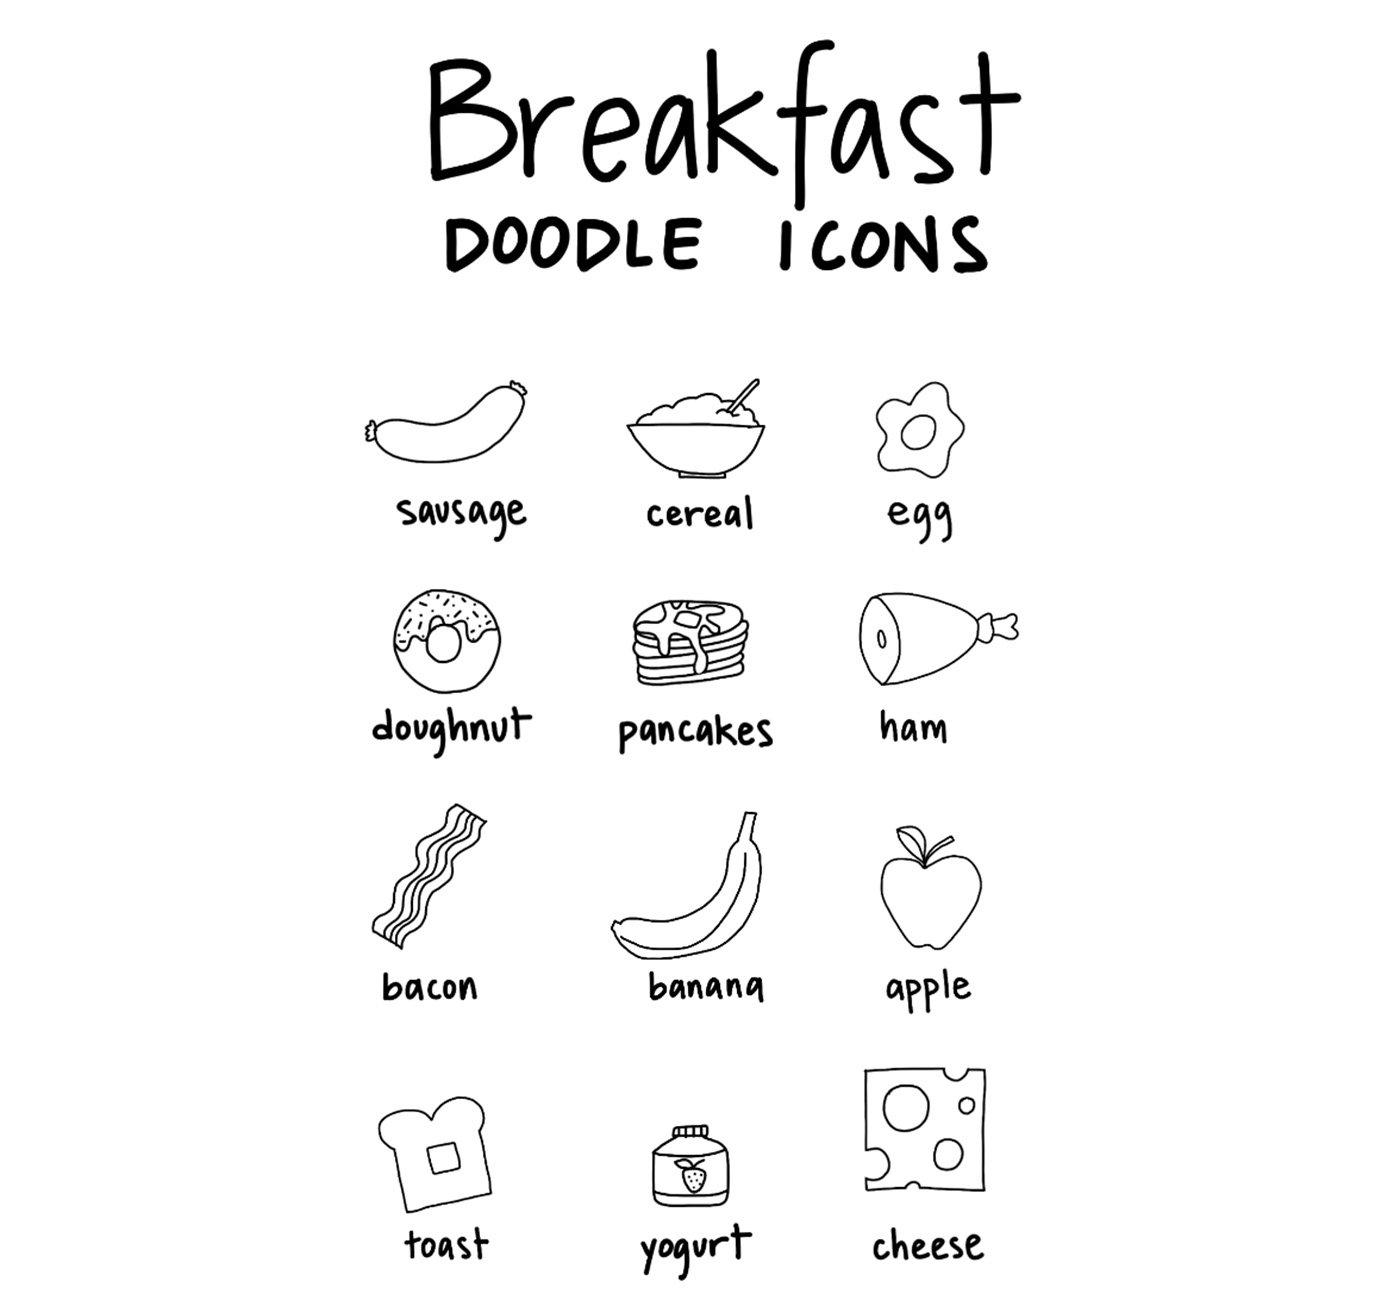 A graphic titled “Breakfast Doodle Icons” shares doodles of sausage, cereal, an egg, a doughnut, pancakes, ham, bacon, a banana, an apple, toast, yogurt, and cheese. 